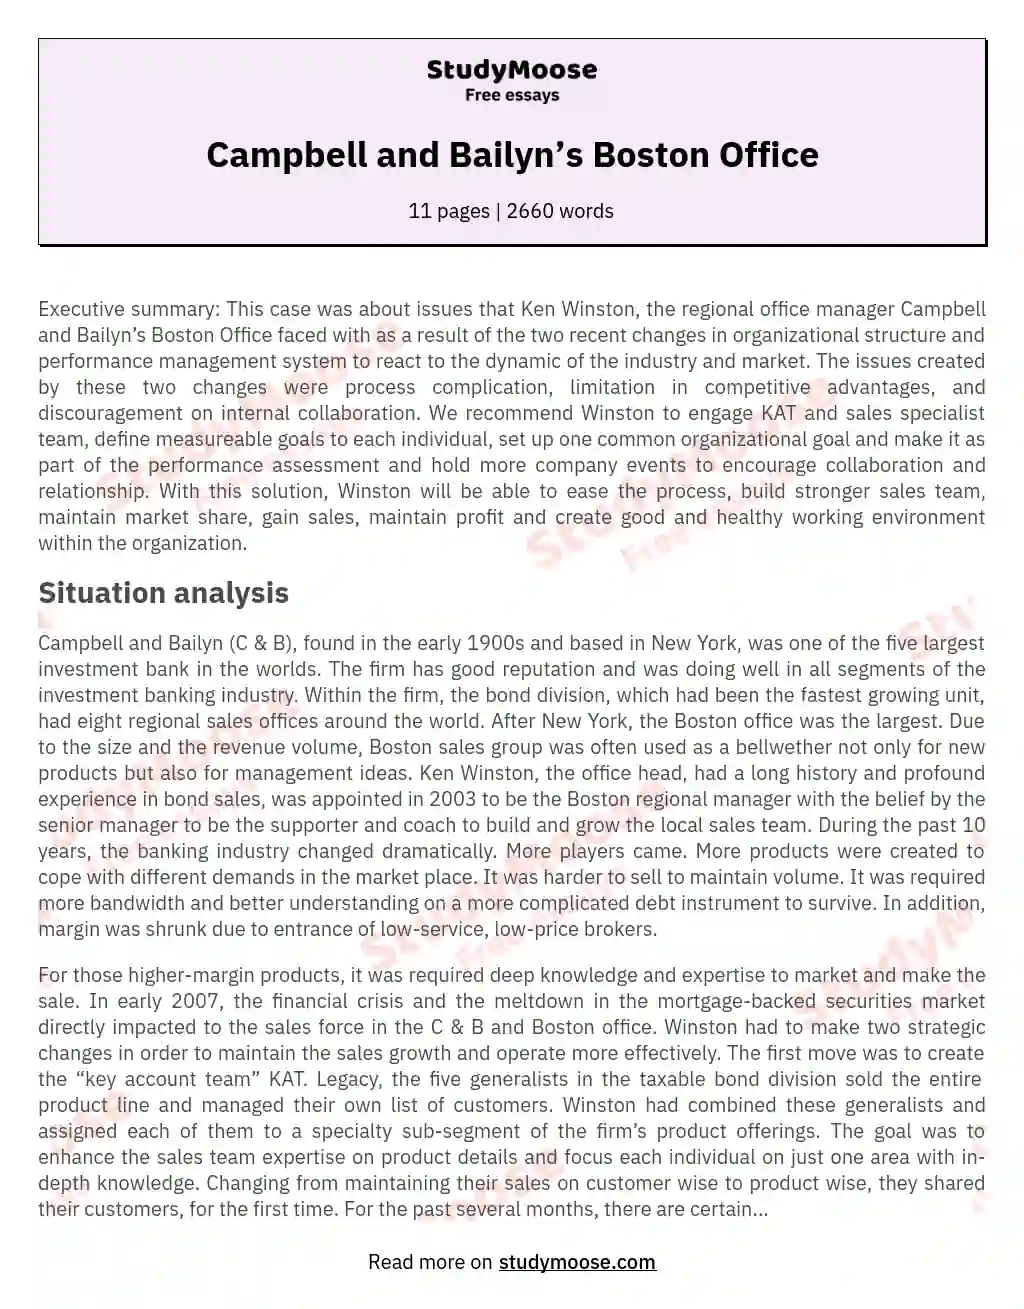 Campbell and Bailyn’s Boston Office essay